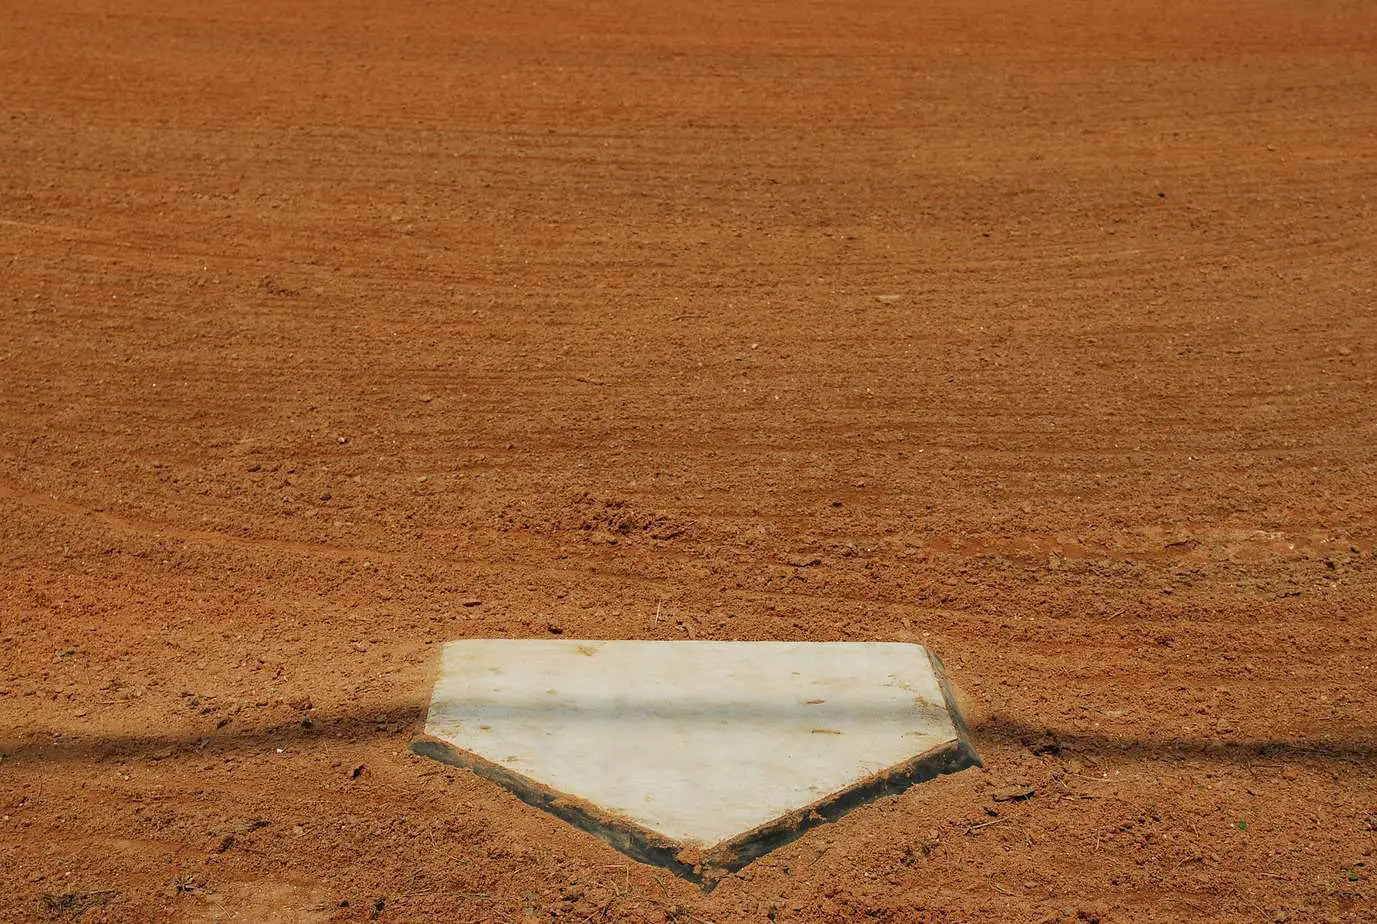 Why are Softball Infields Dirt and not Grass? 3 Main Reasons